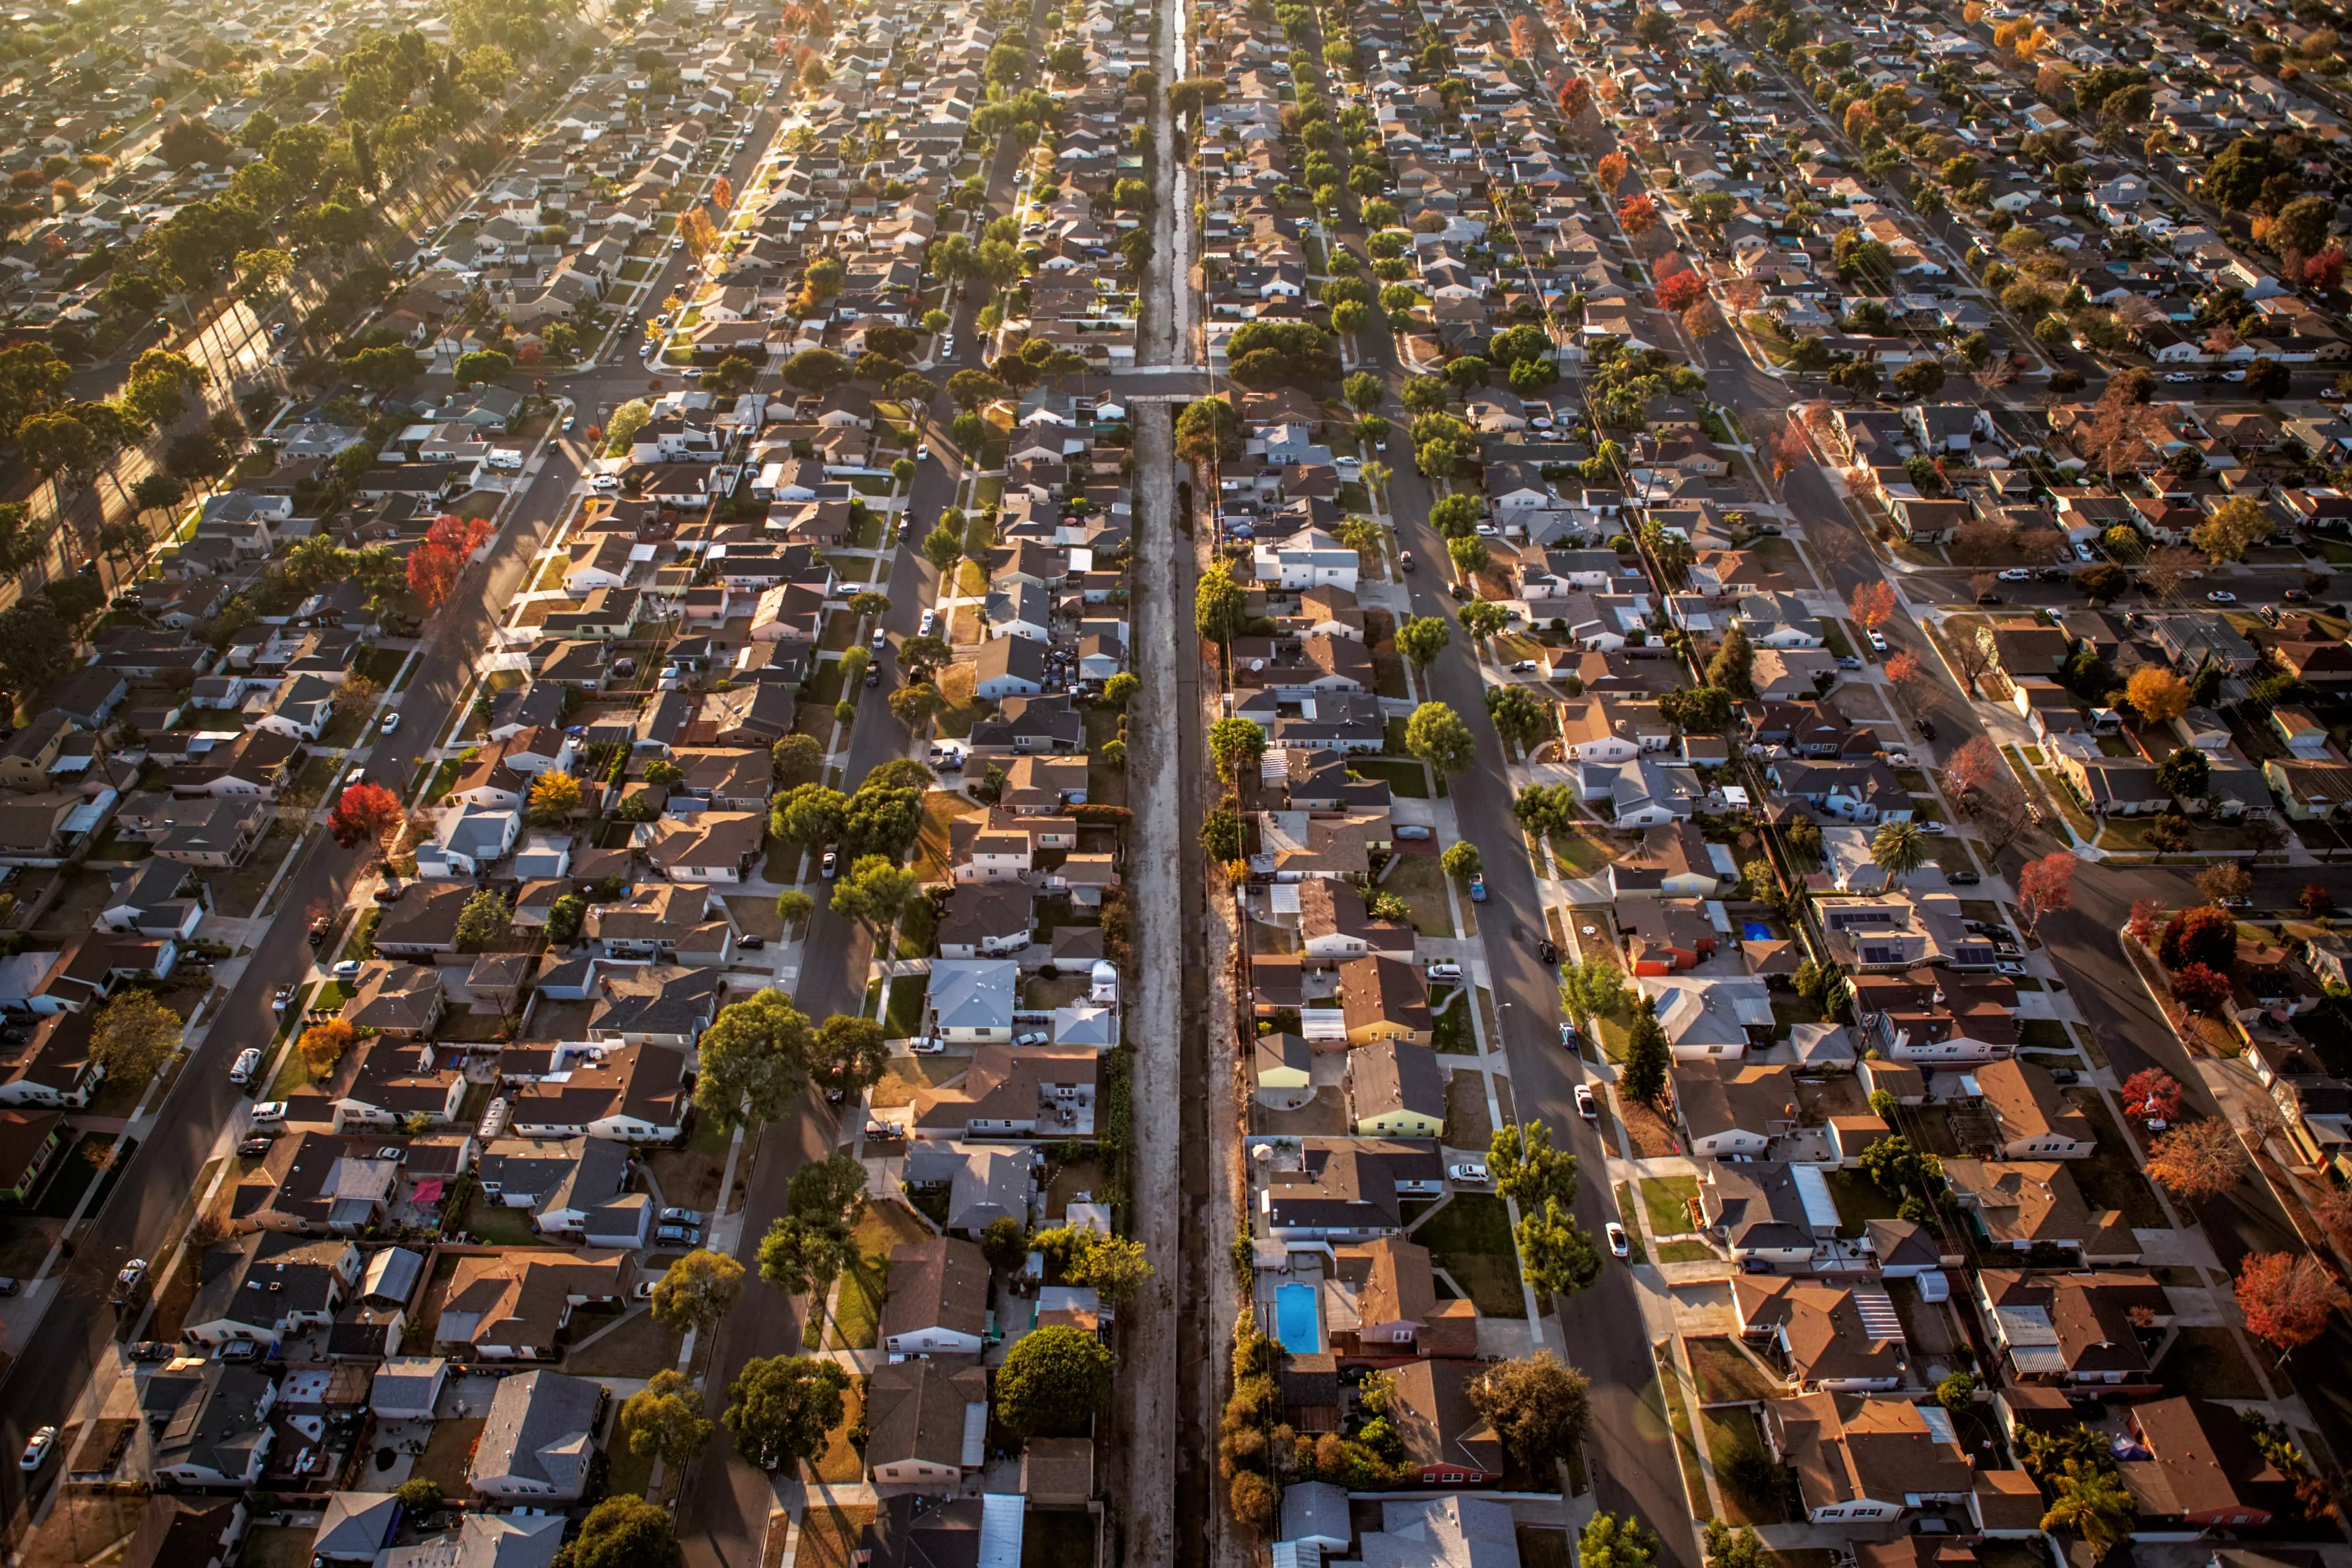 An aerial view of a Los Angeles neighborhood in the evening.